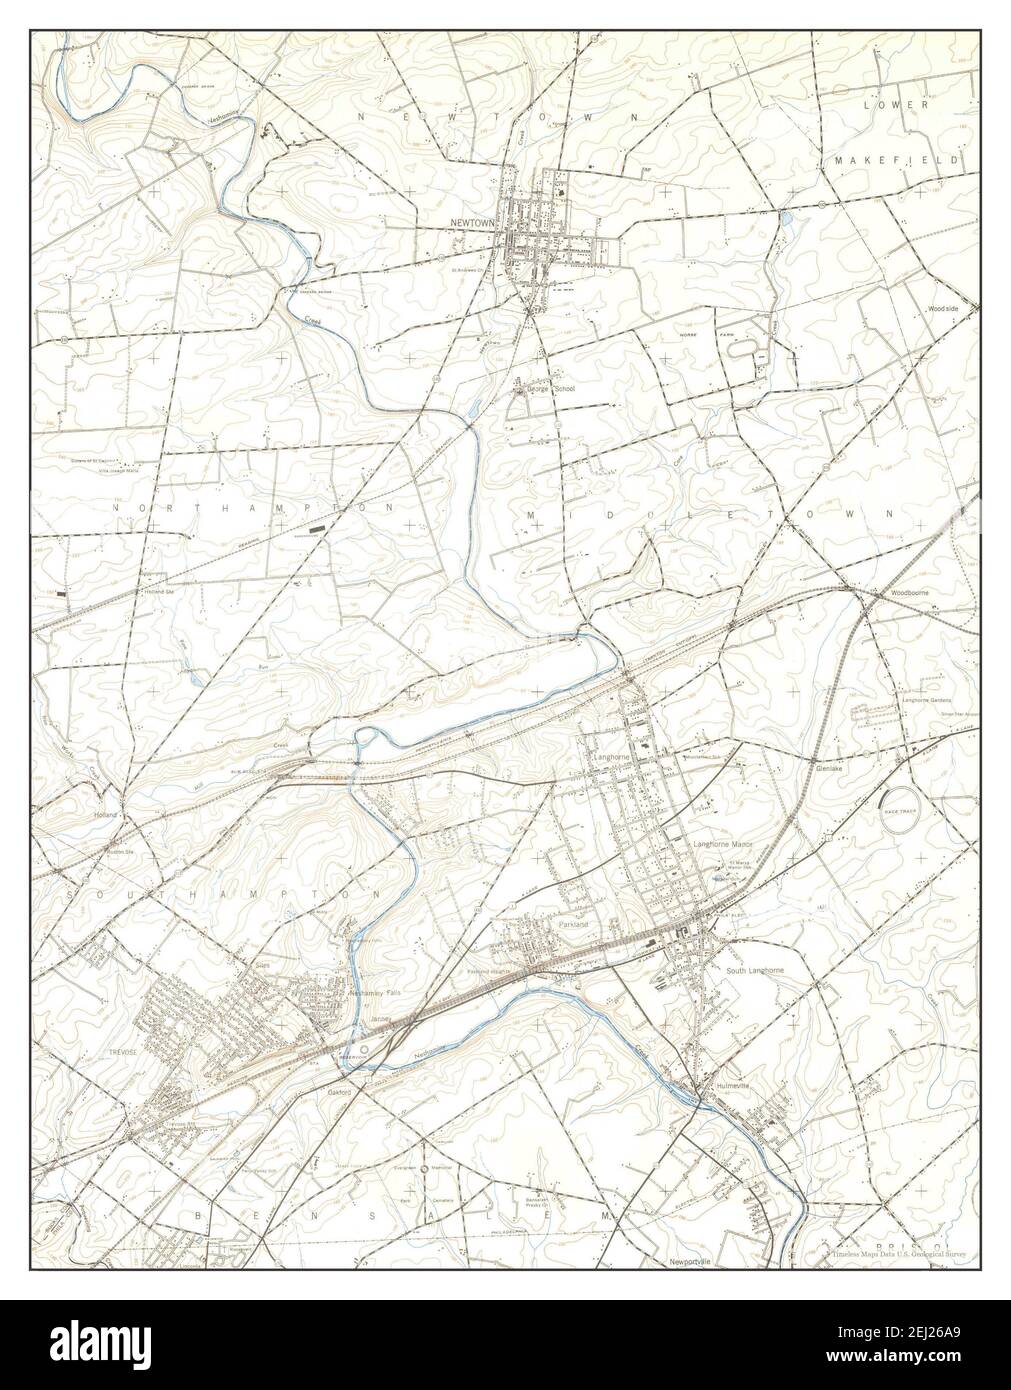 Langhorne, Pennsylvania, map 1944, 1:24000, United States of America by Timeless Maps, data U.S. Geological Survey Stock Photo